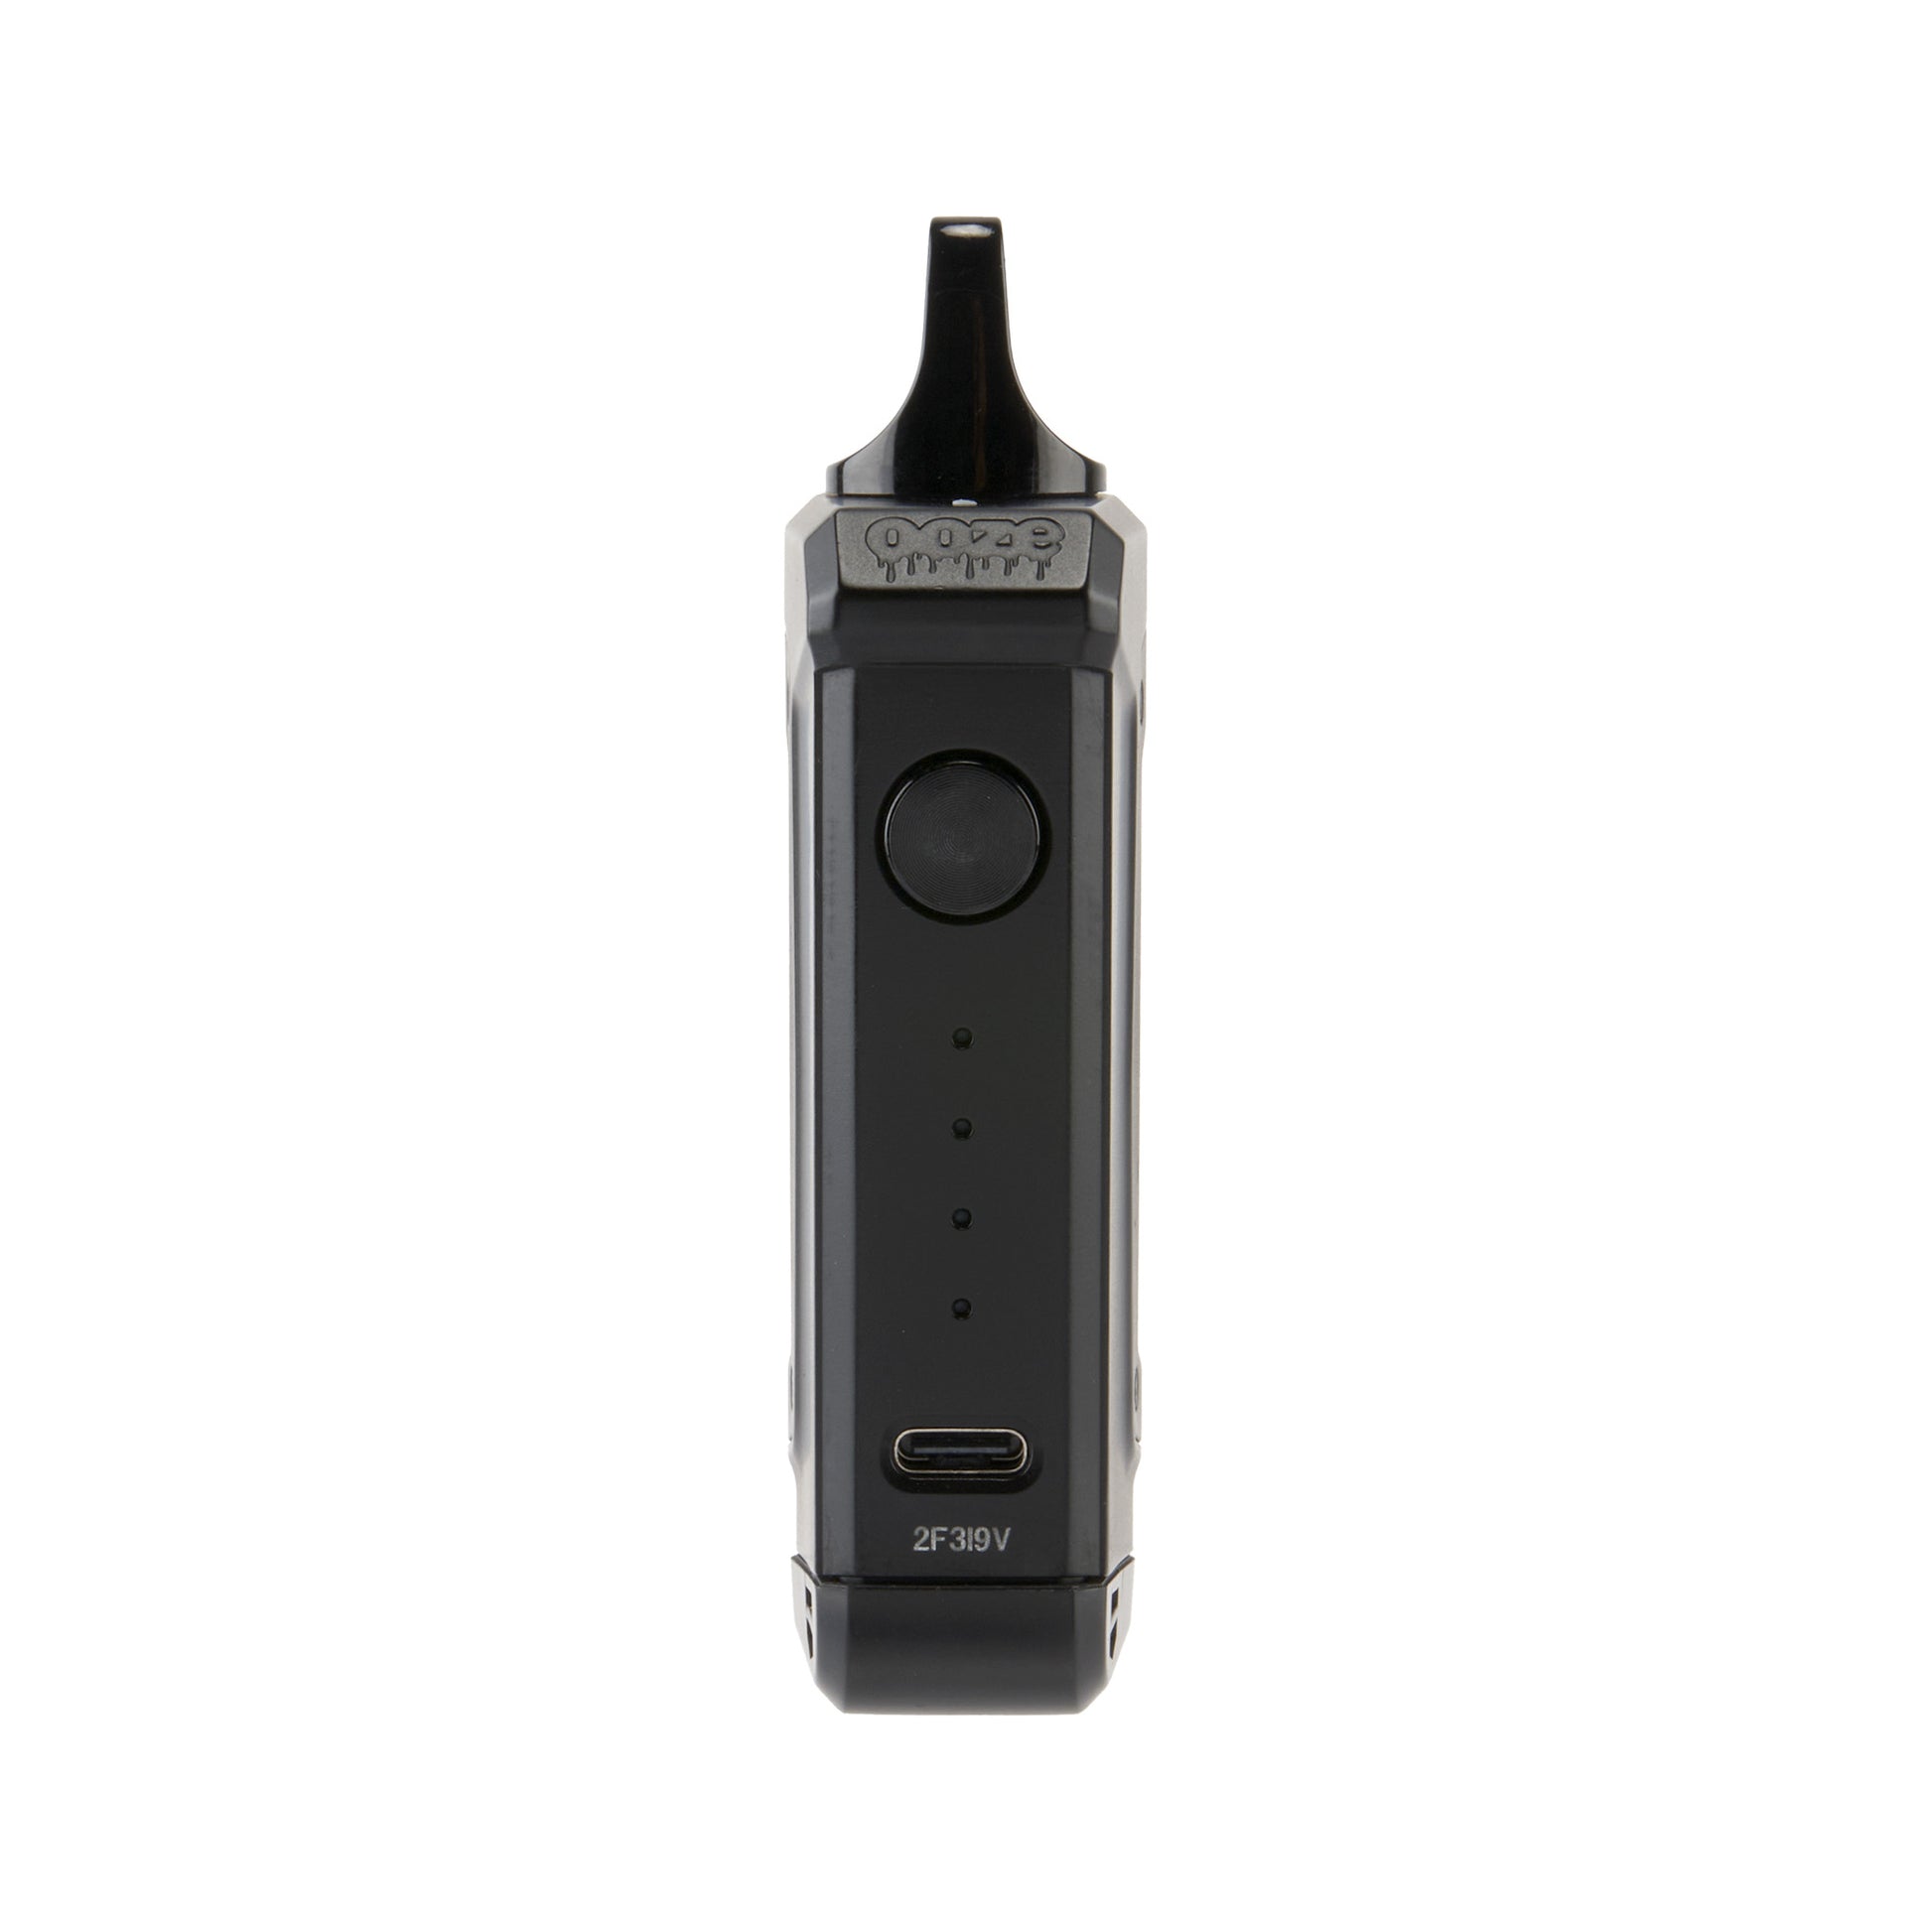 The panther black Ooze Duplex 2 extract vaporizer is show with the magnetic plate removed to show the interface